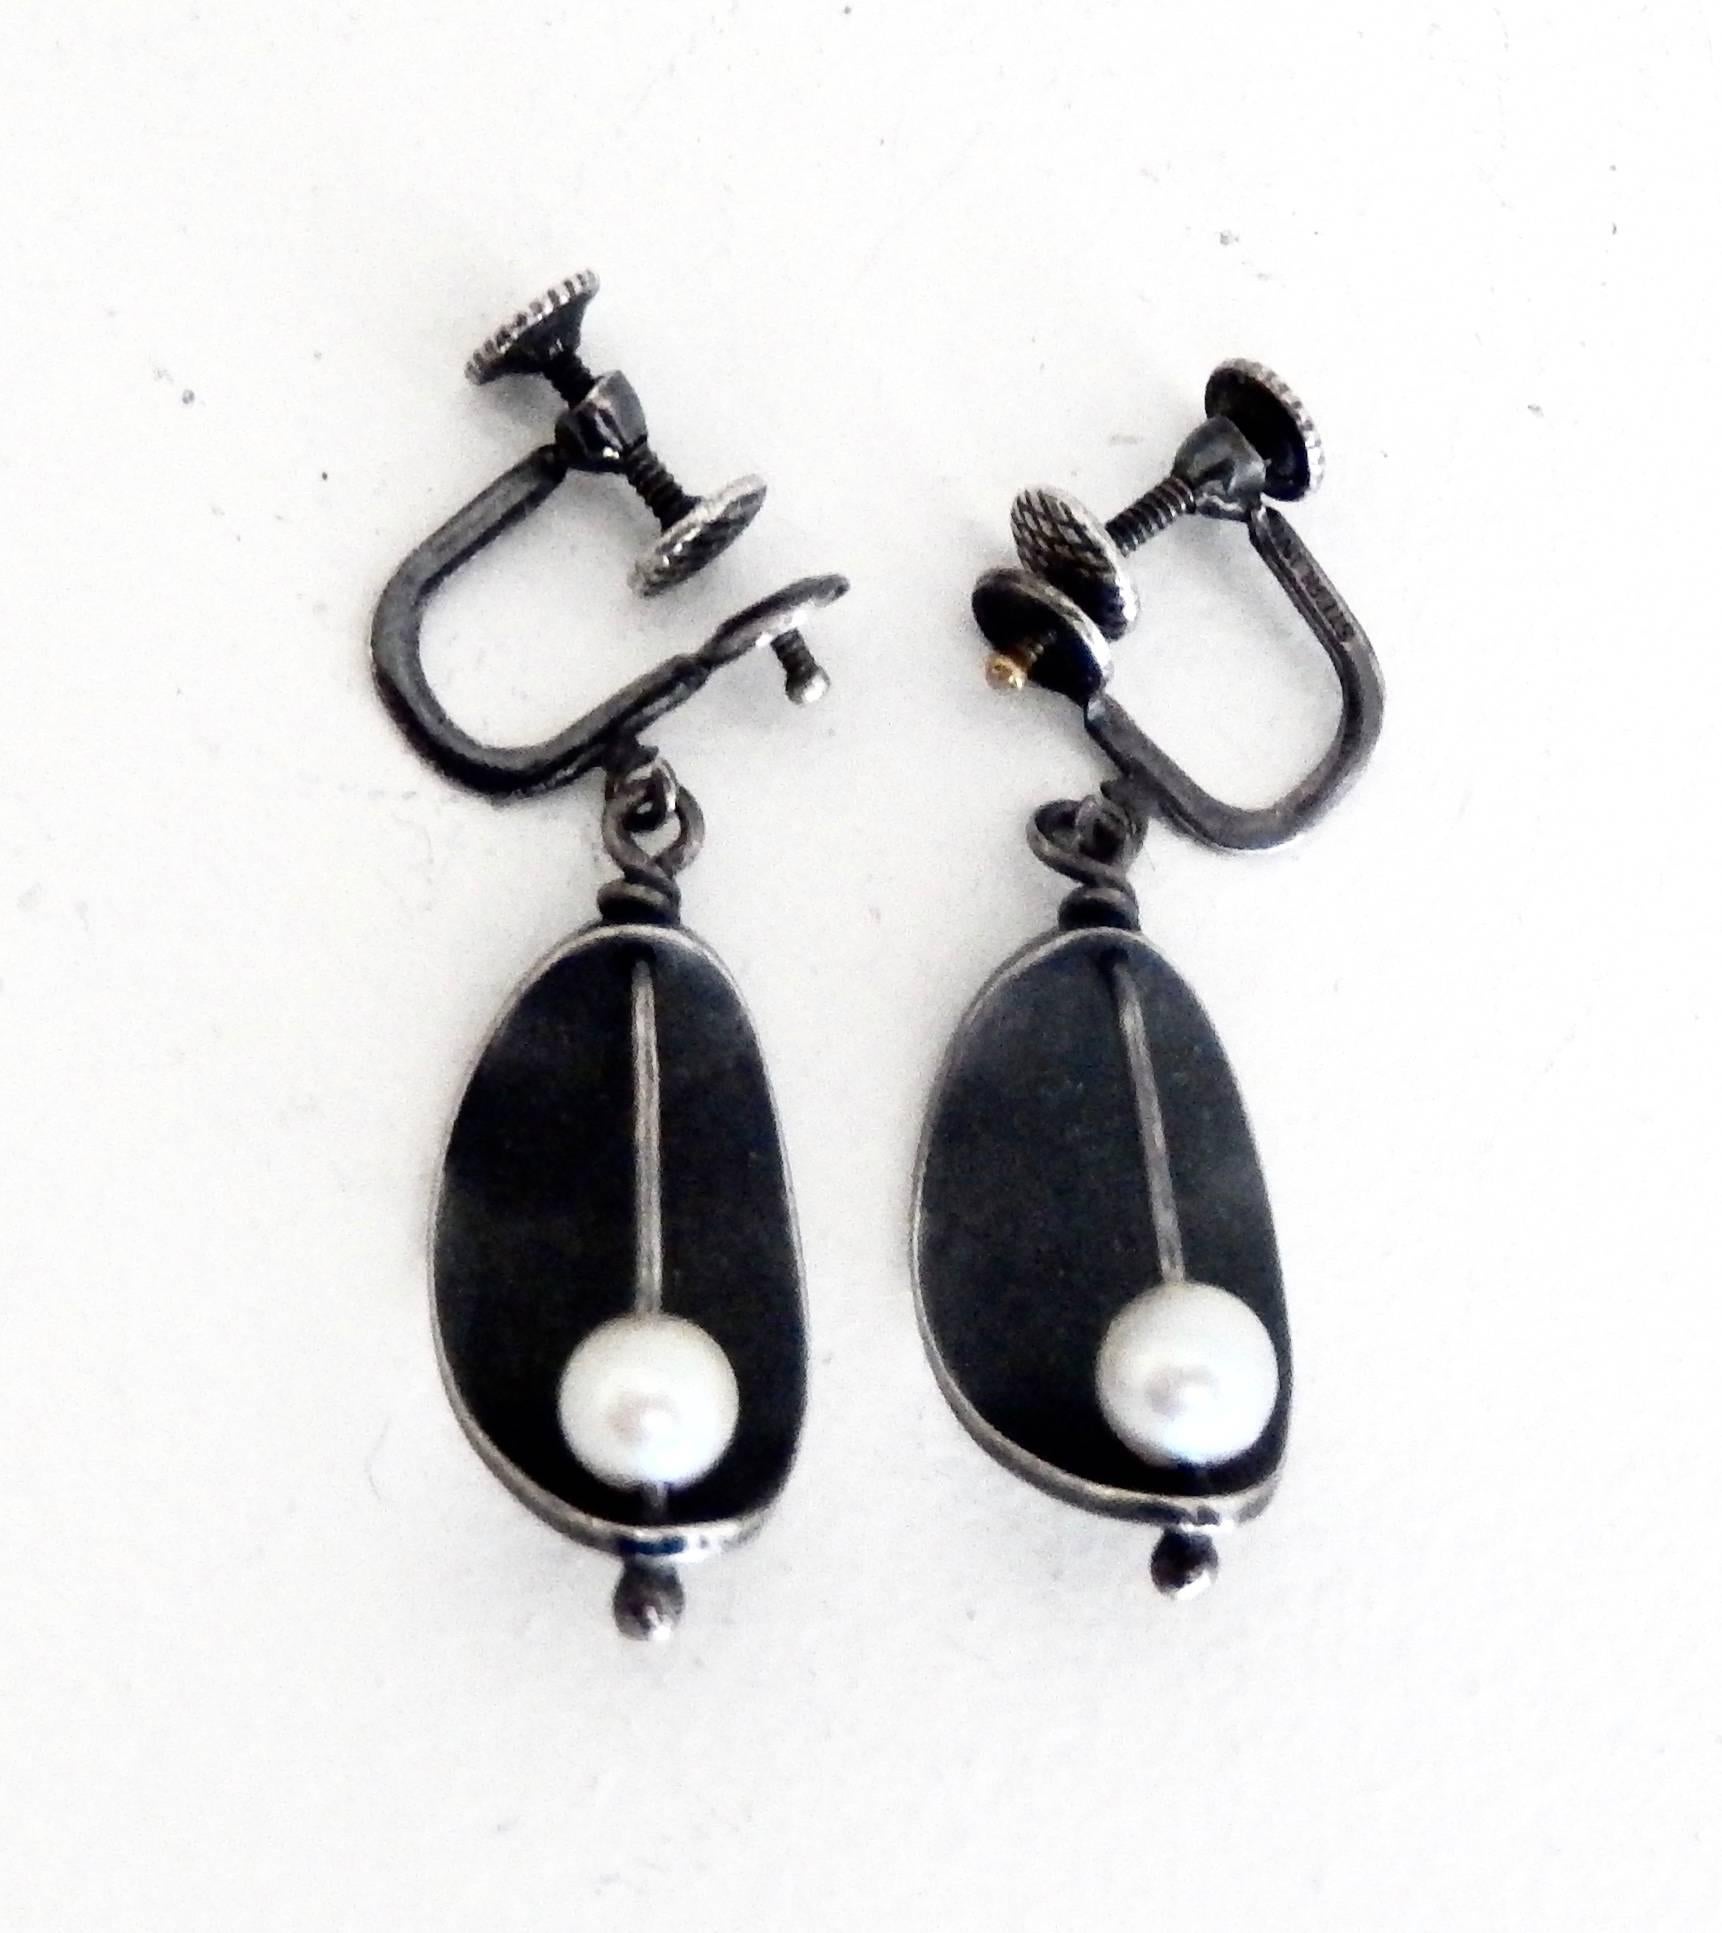 A pair of mid-century modern earrings by the highly-regarded New York modernist jeweler Ed Wiener (1918-1991).  As was typical of Wiener's work, these earrings demonstrate his mastery of silversmithing and sculptural focus.  Earrings are screw back.